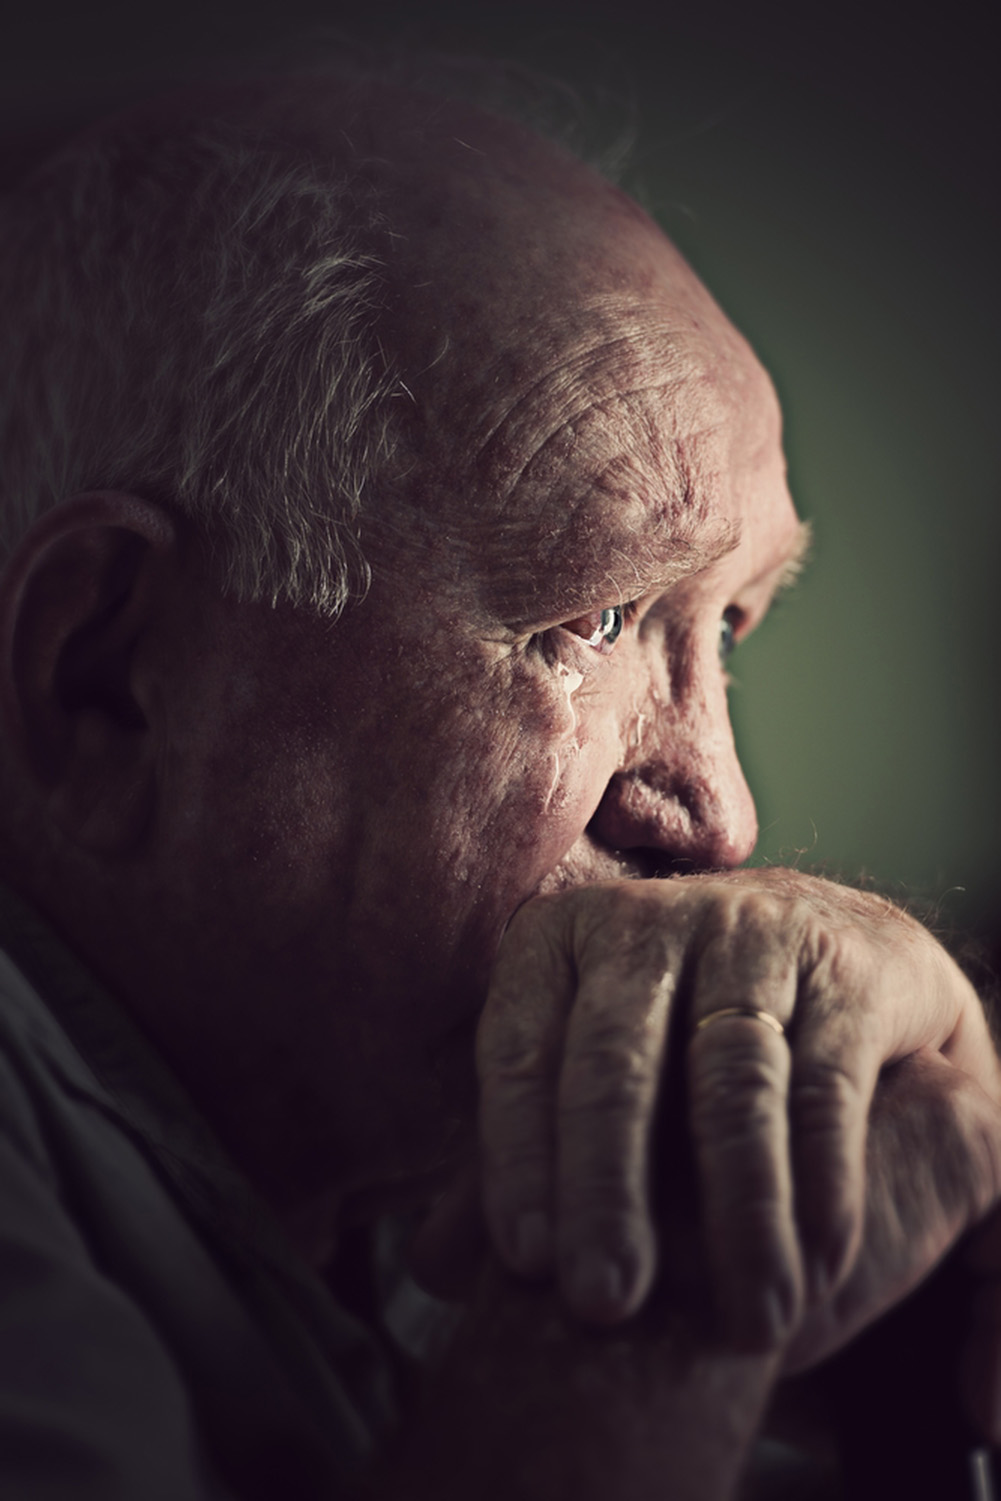 image of AARONTAIT COPYRIGHTED 2014 105 CRYING OLD MAN ADVERTISING ELDER ABUSE